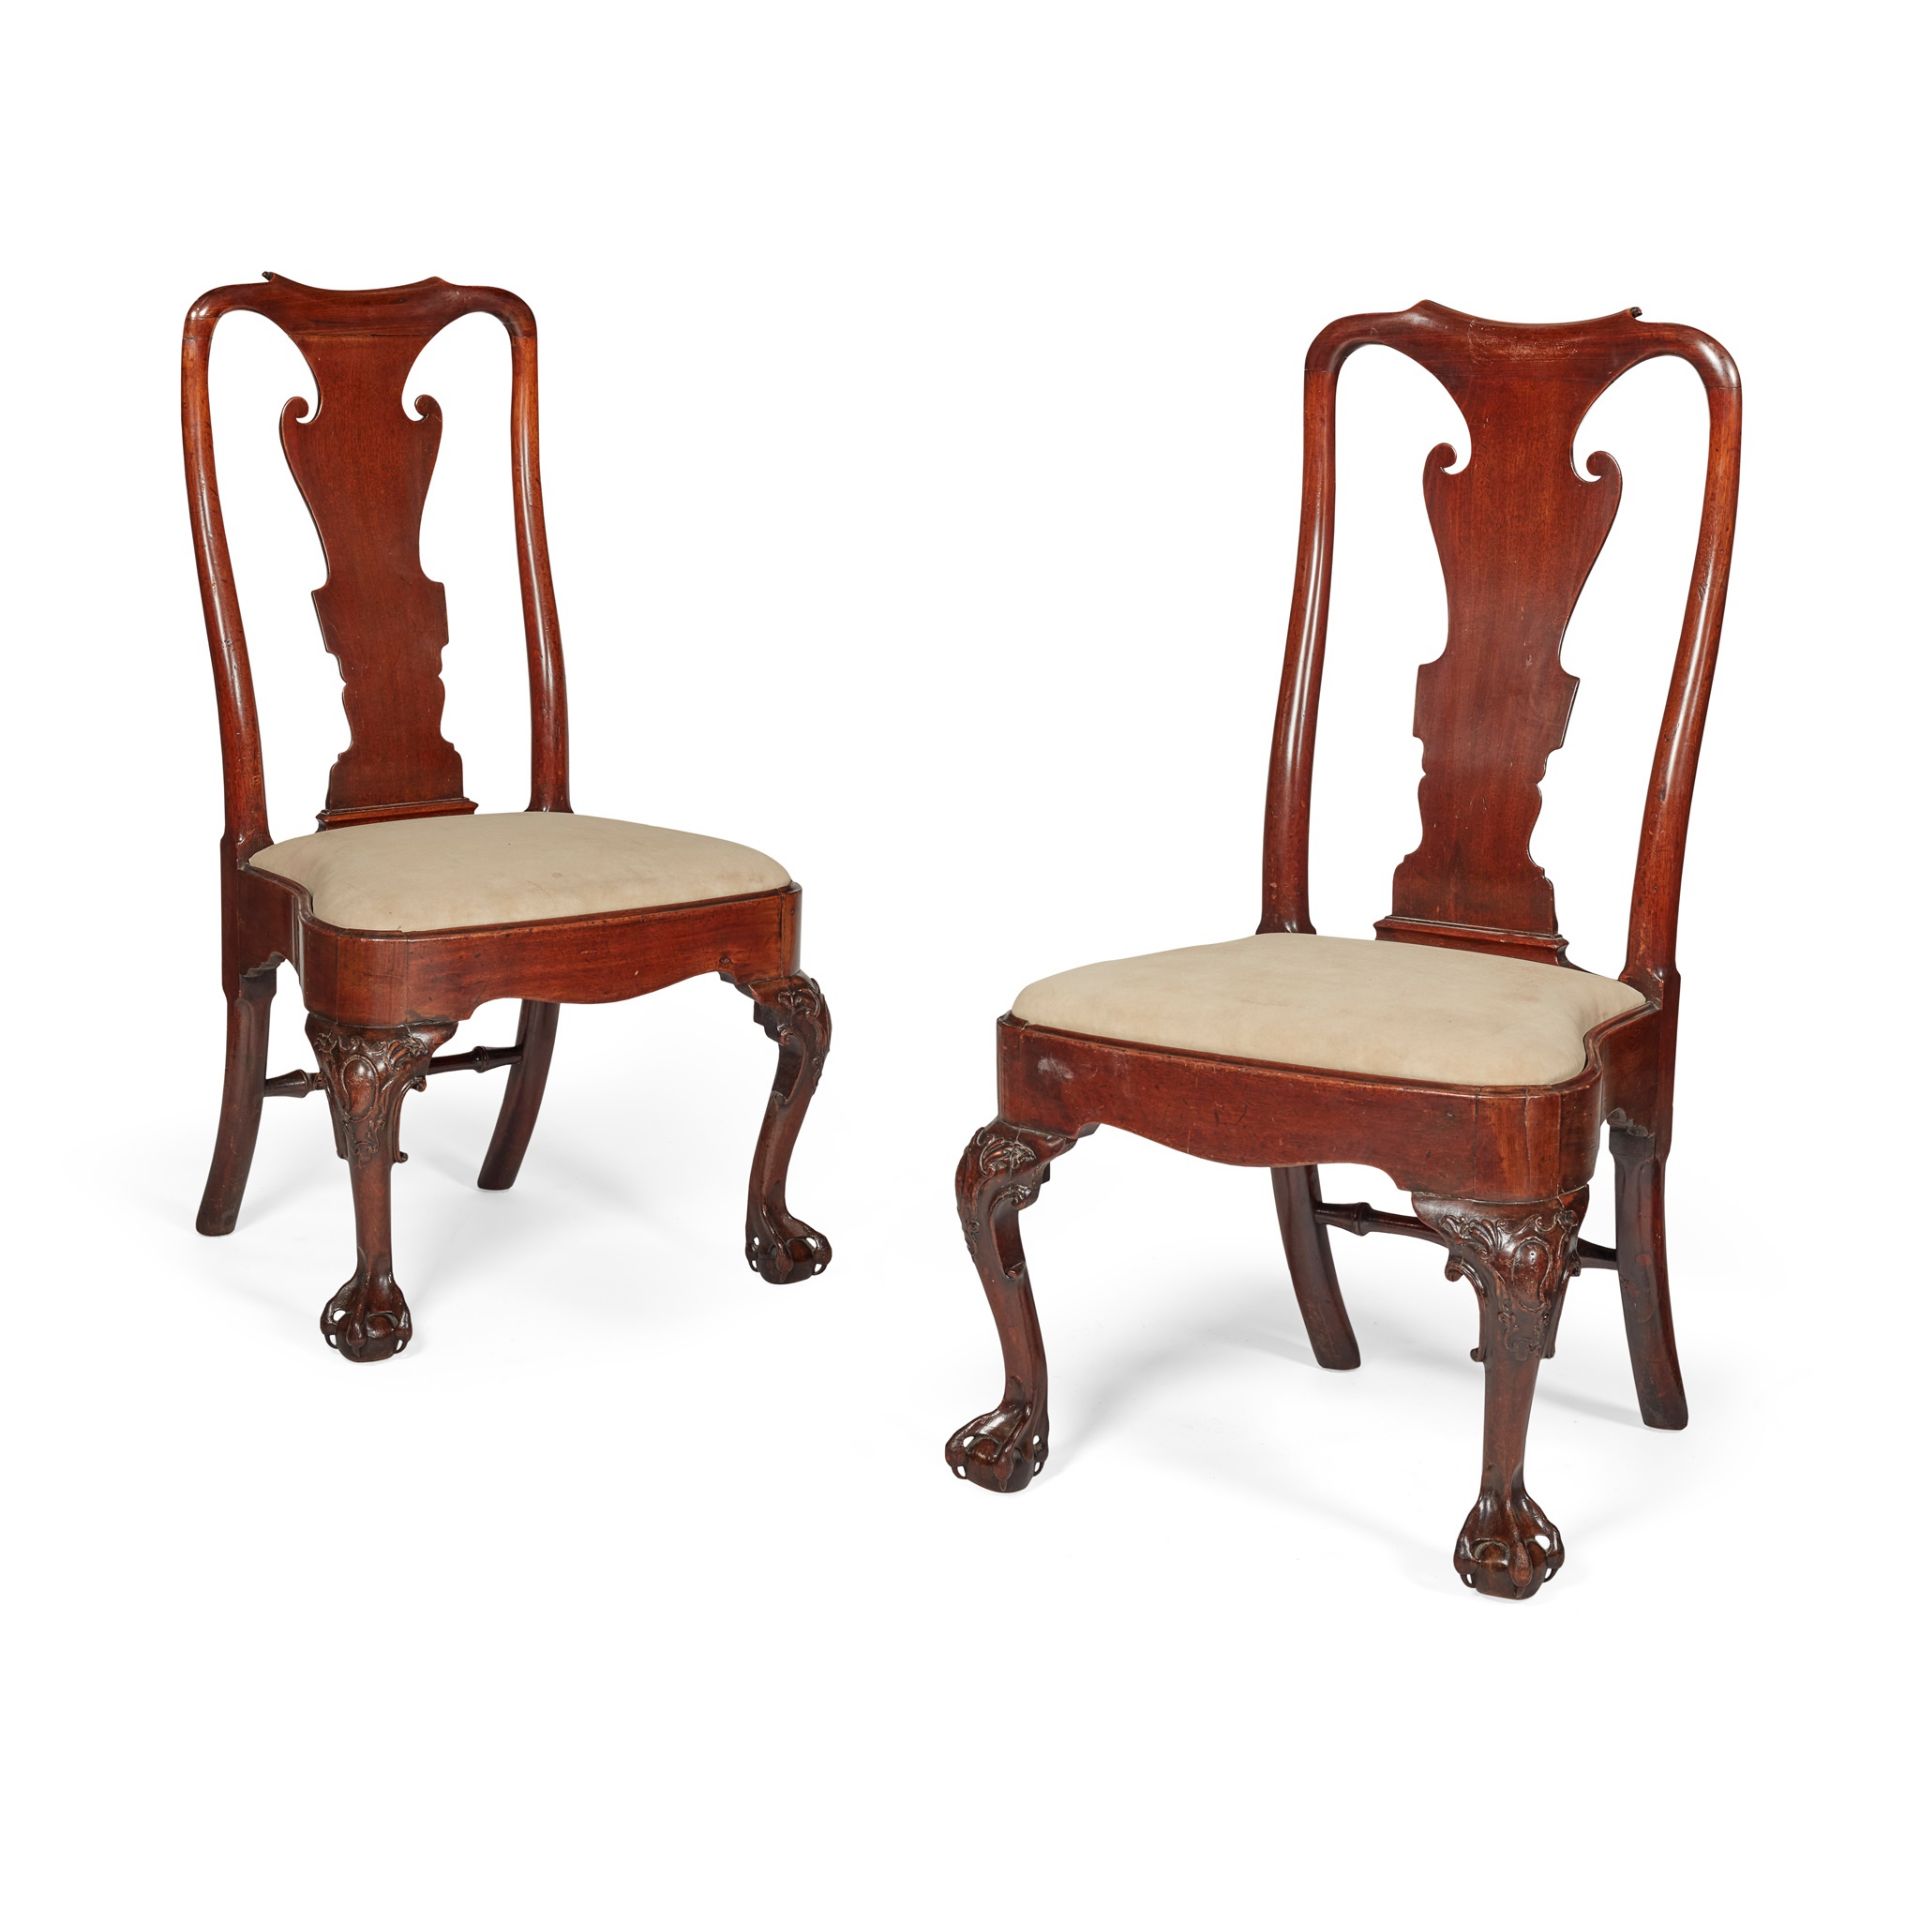 PAIR OF GEORGE II MAHOGANY SIDE CHAIRS 2ND QUARTER 18TH CENTURY